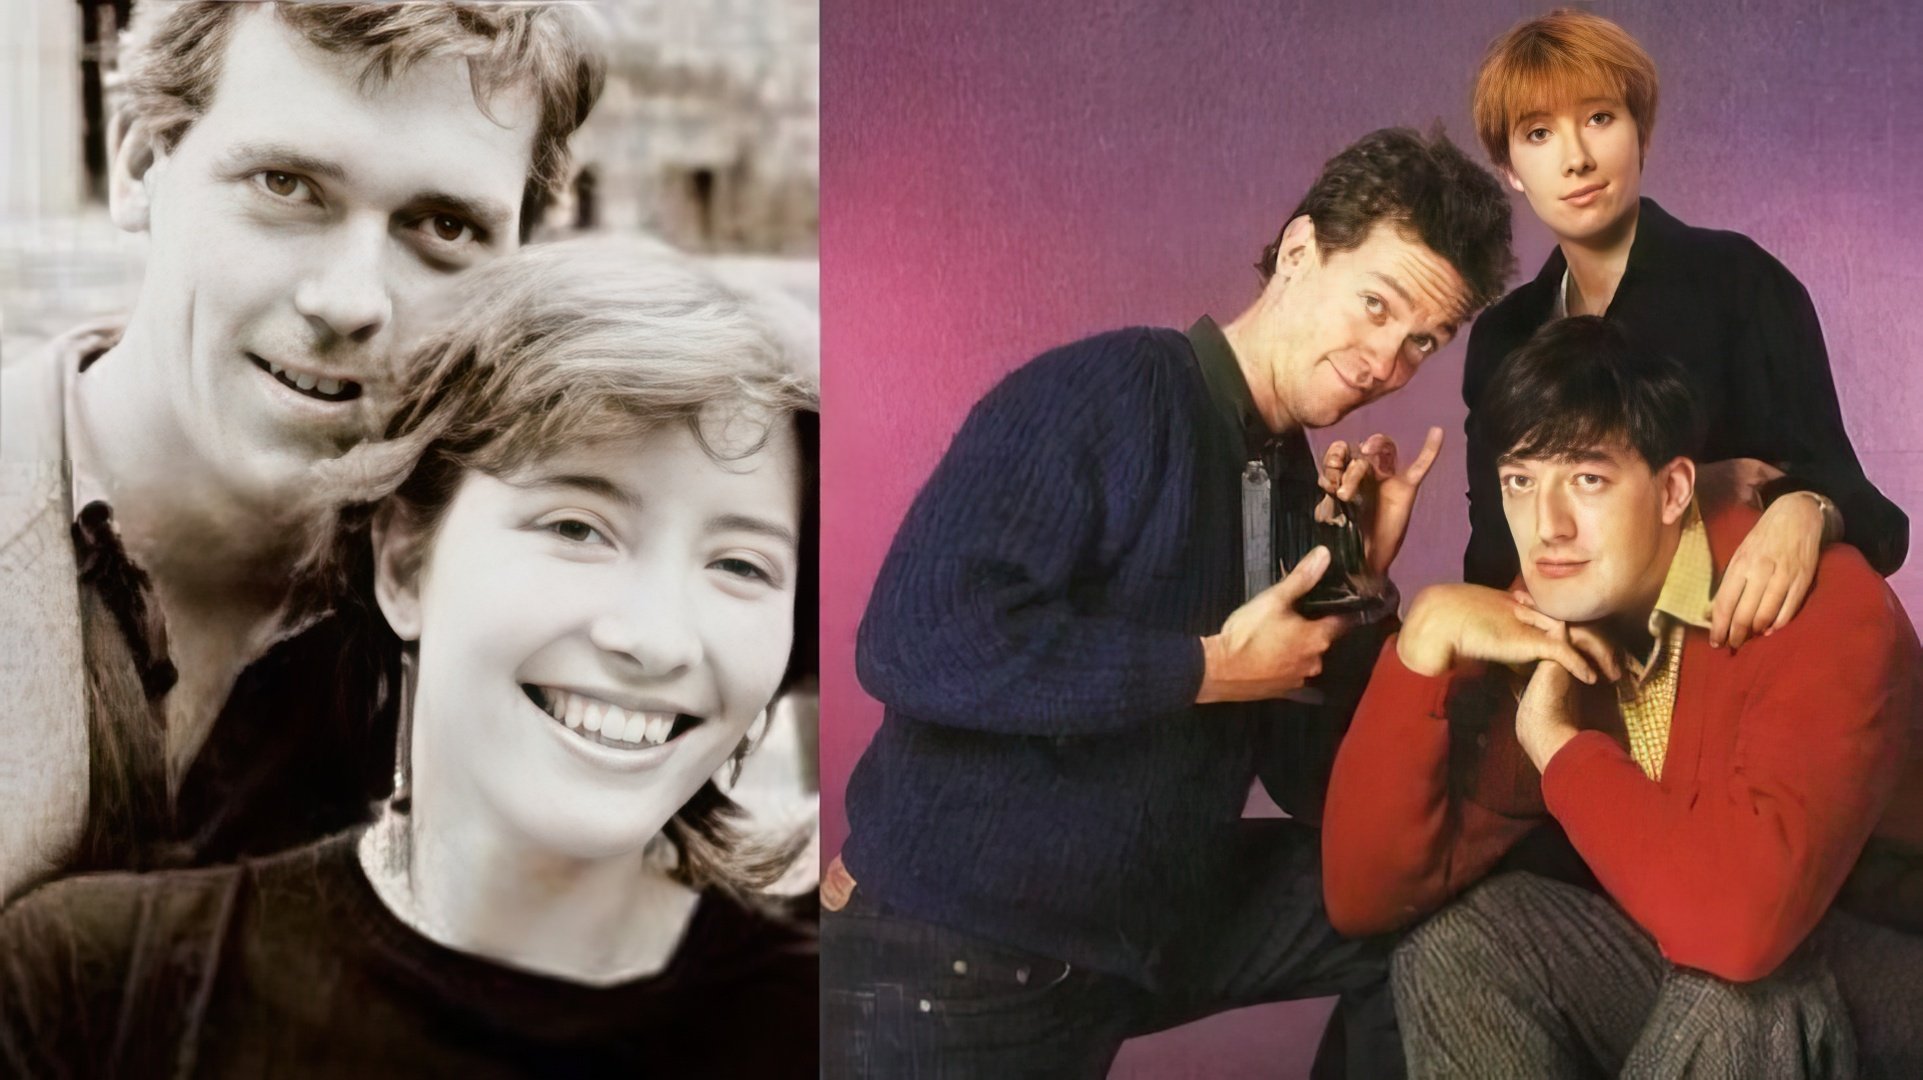 In their youth, Hugh Laurie and Emma Thompson dated